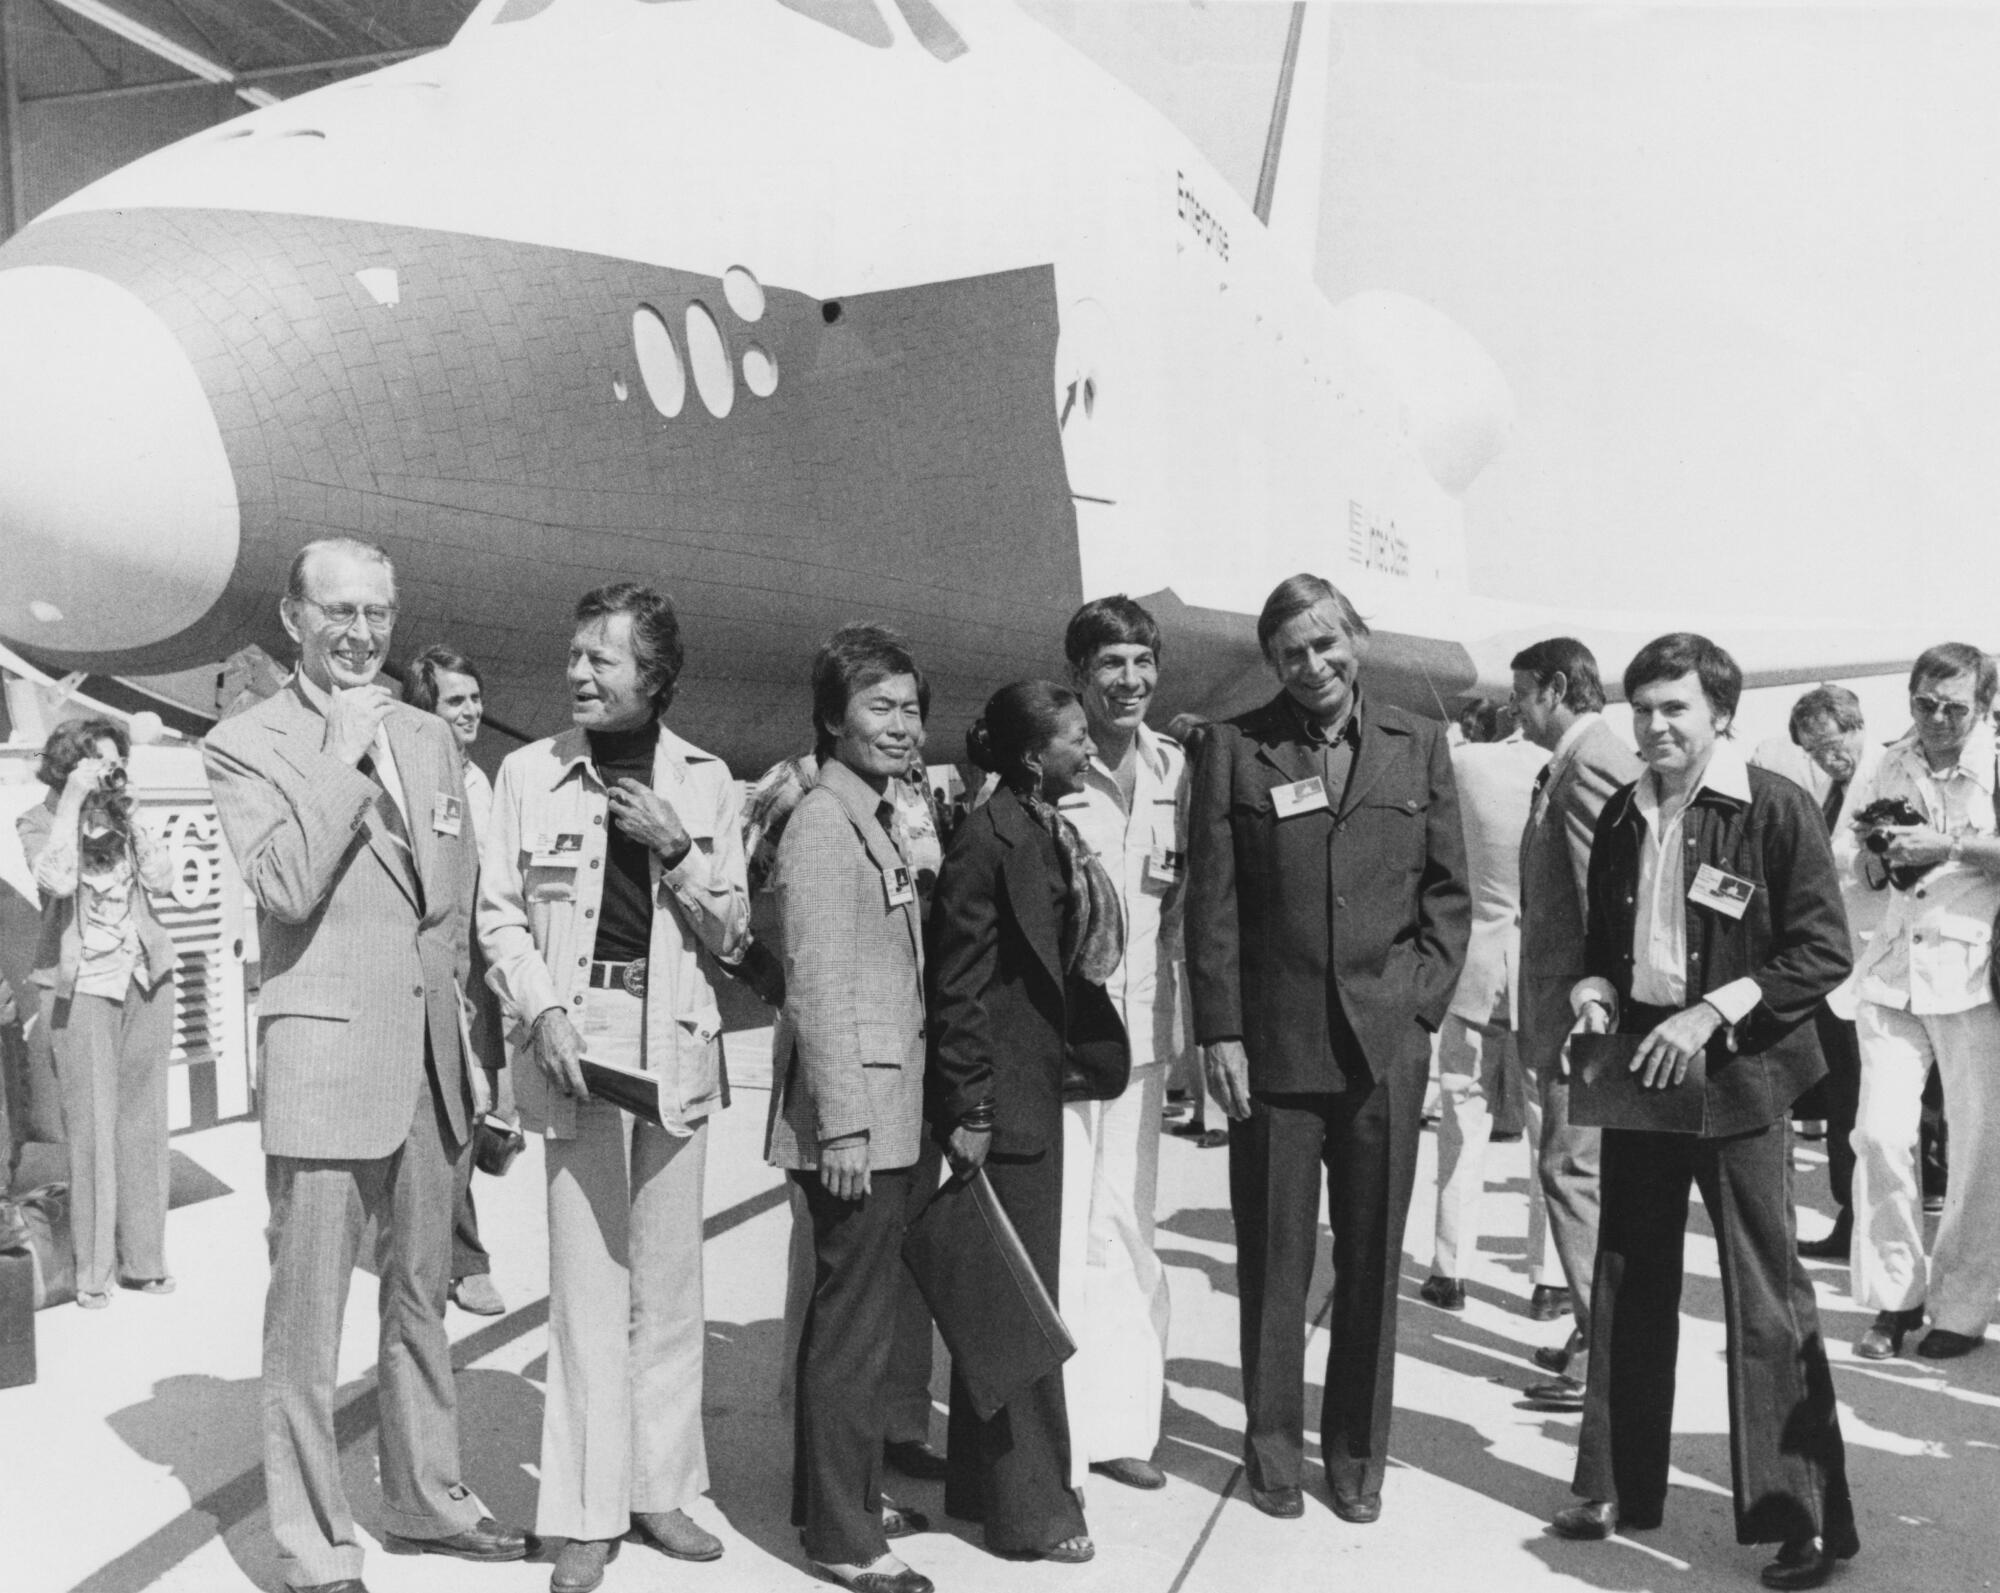 The space shuttle orbiter OV-101, dubbed Enterprise, unveiled in 1976 in Palmdale with "Star Trek" cast members.